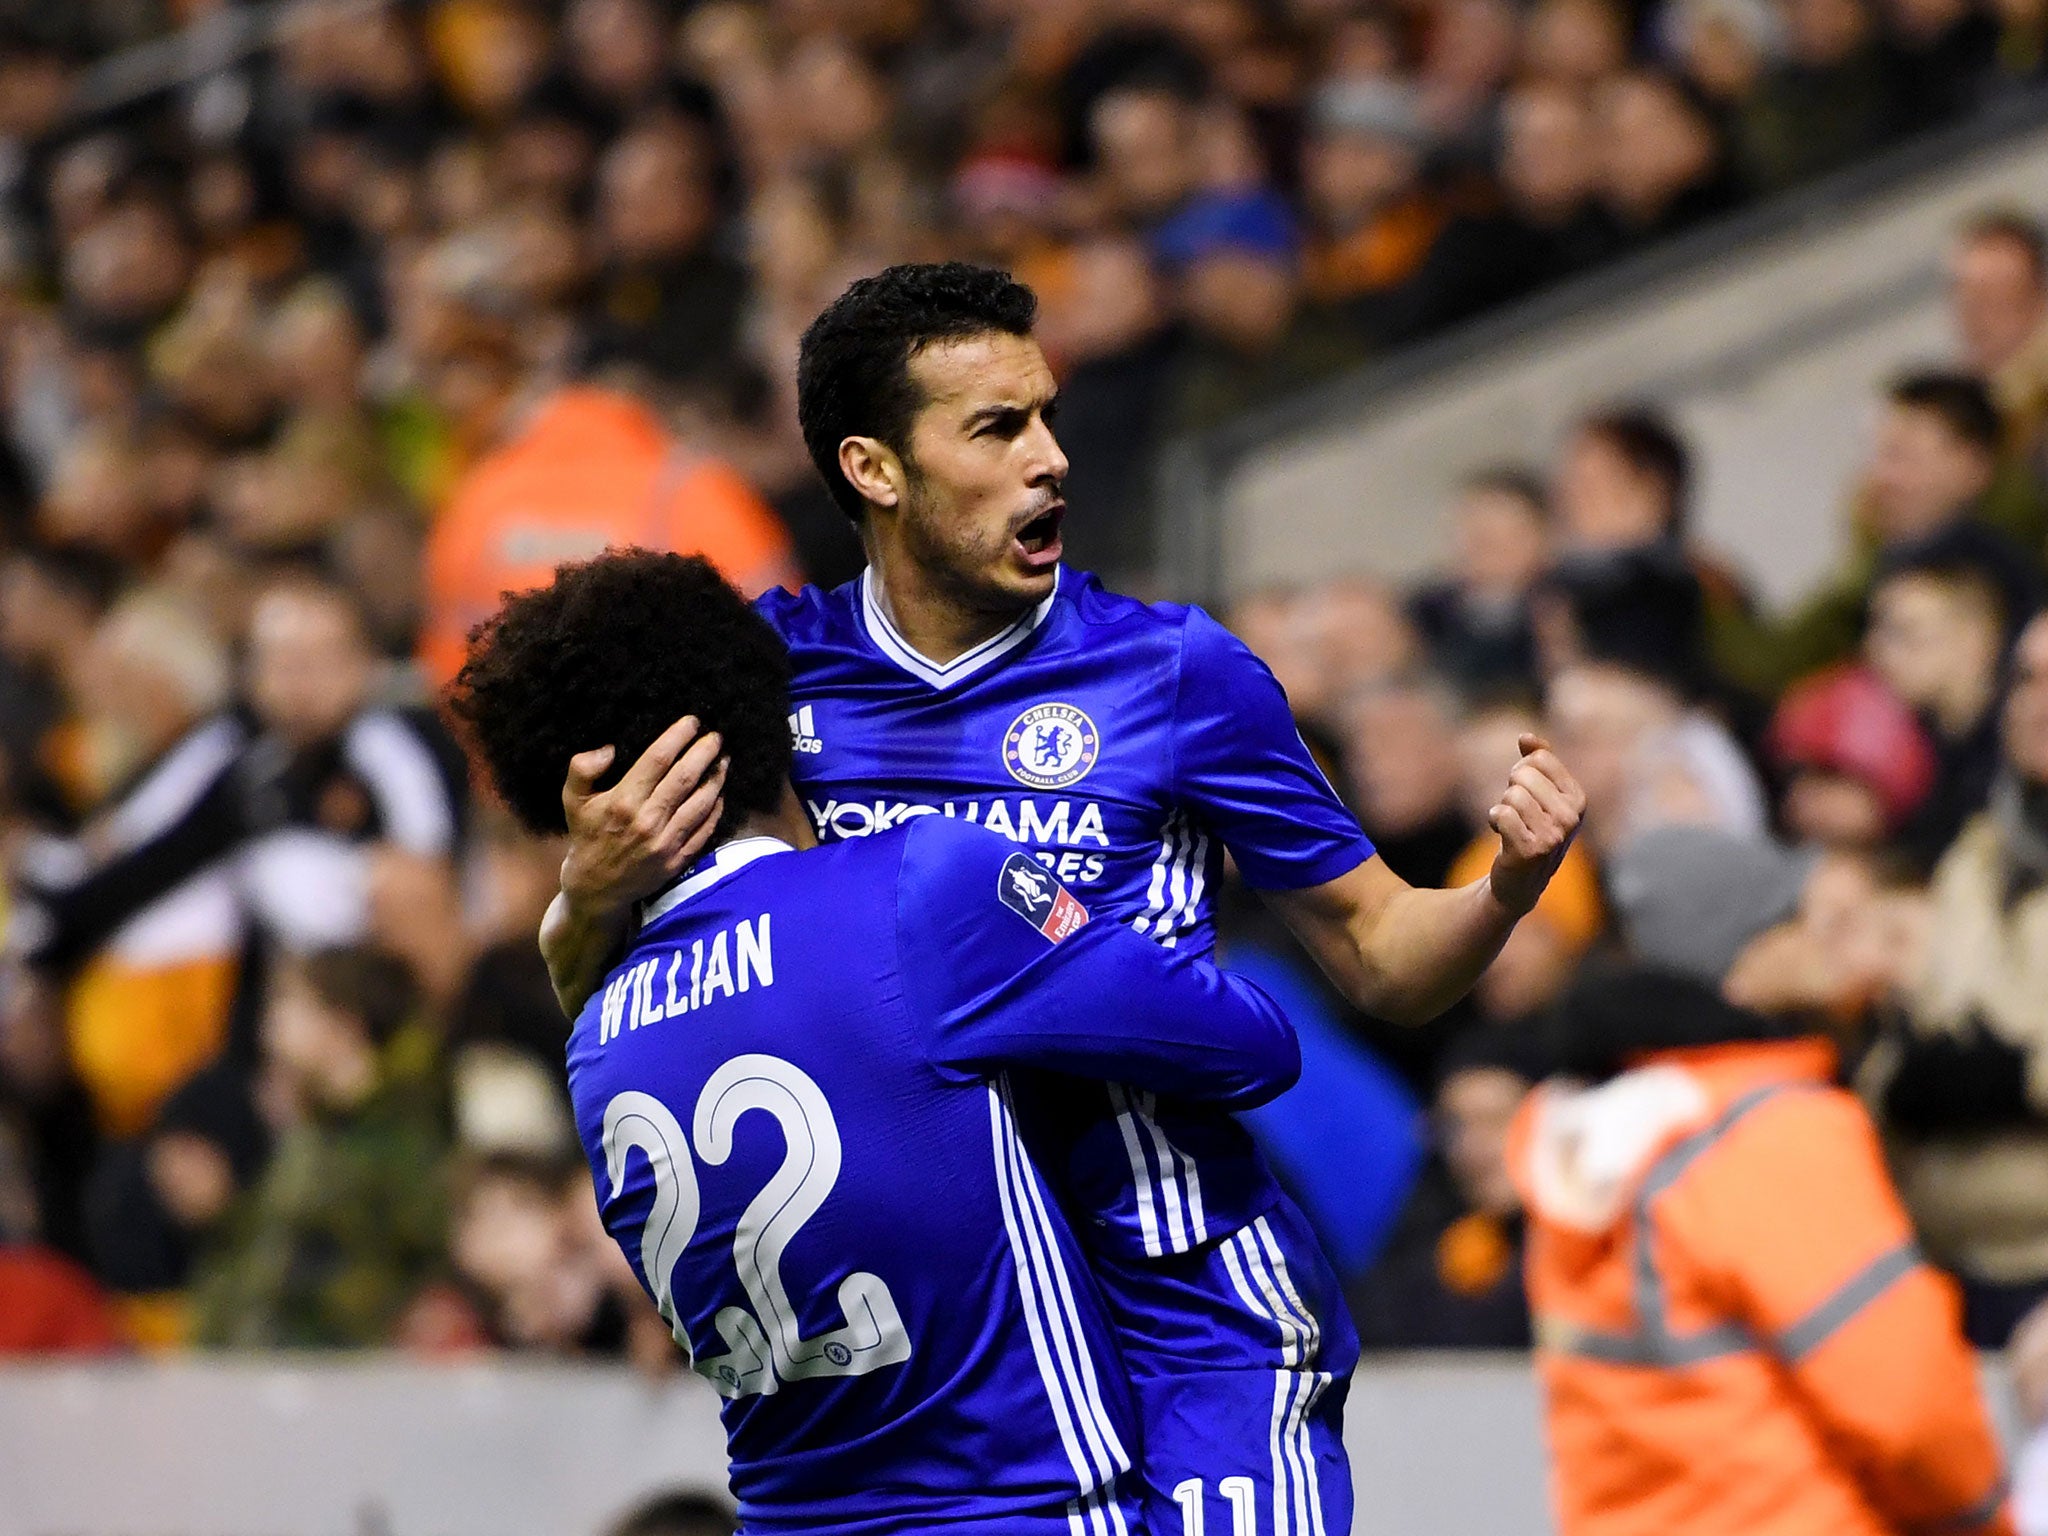 Pedro celebrates with Willian after scoring for the visitors